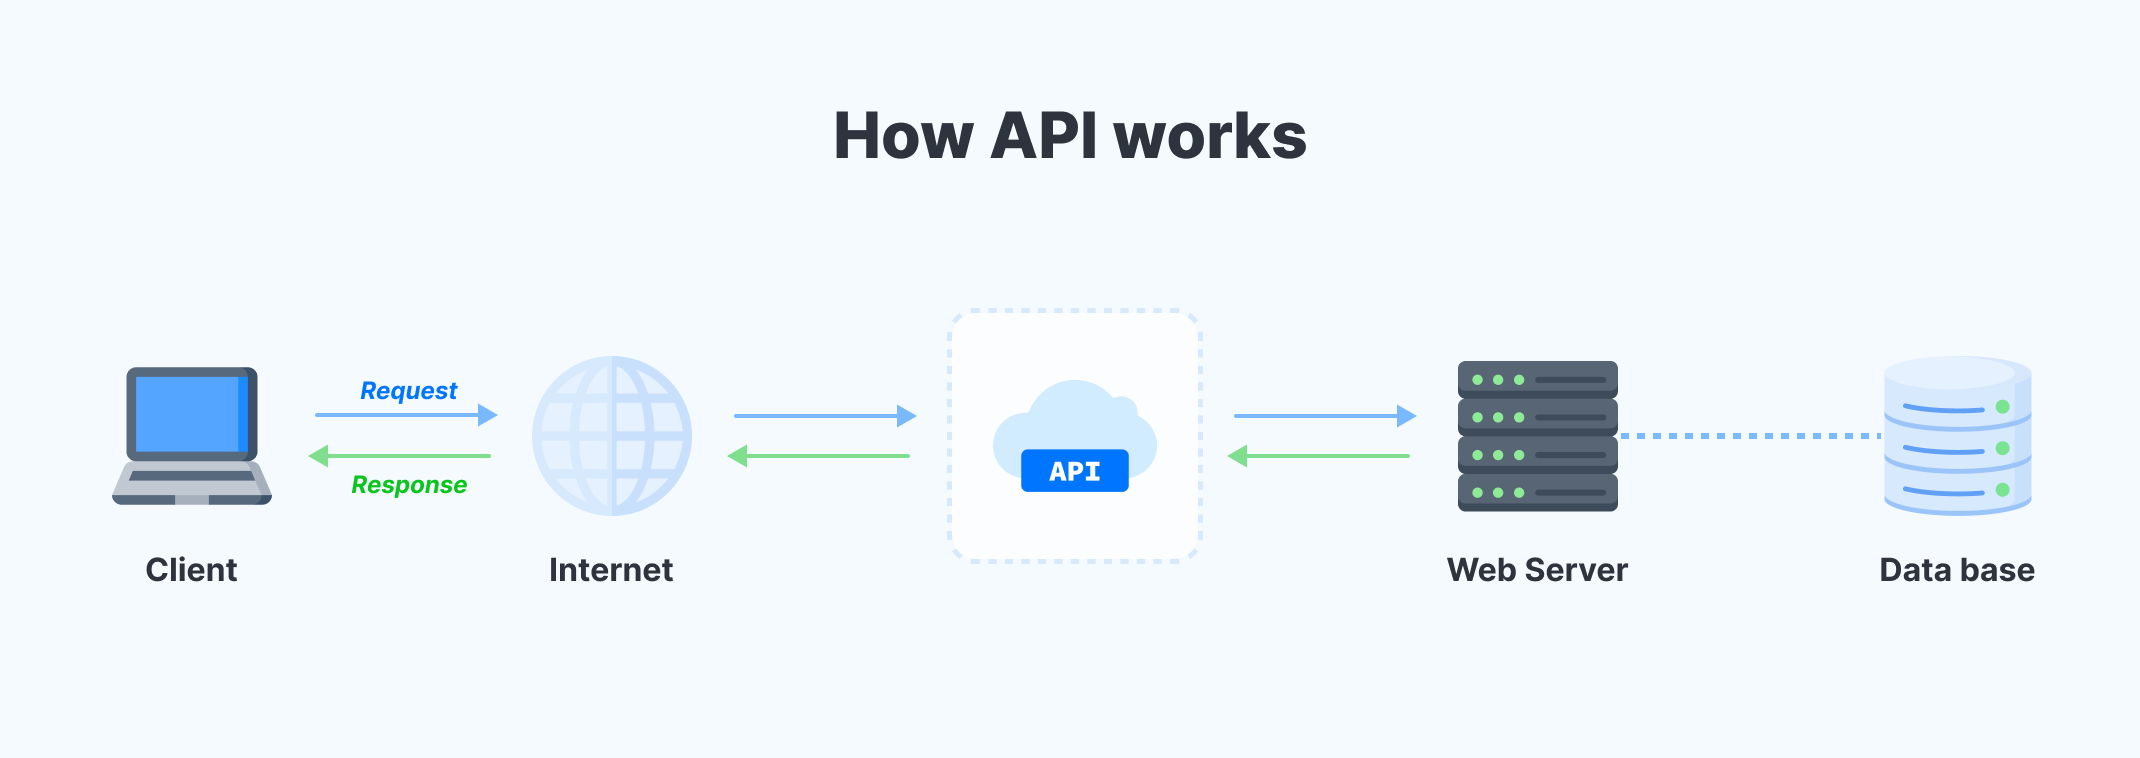 Endpoints in API: how it work